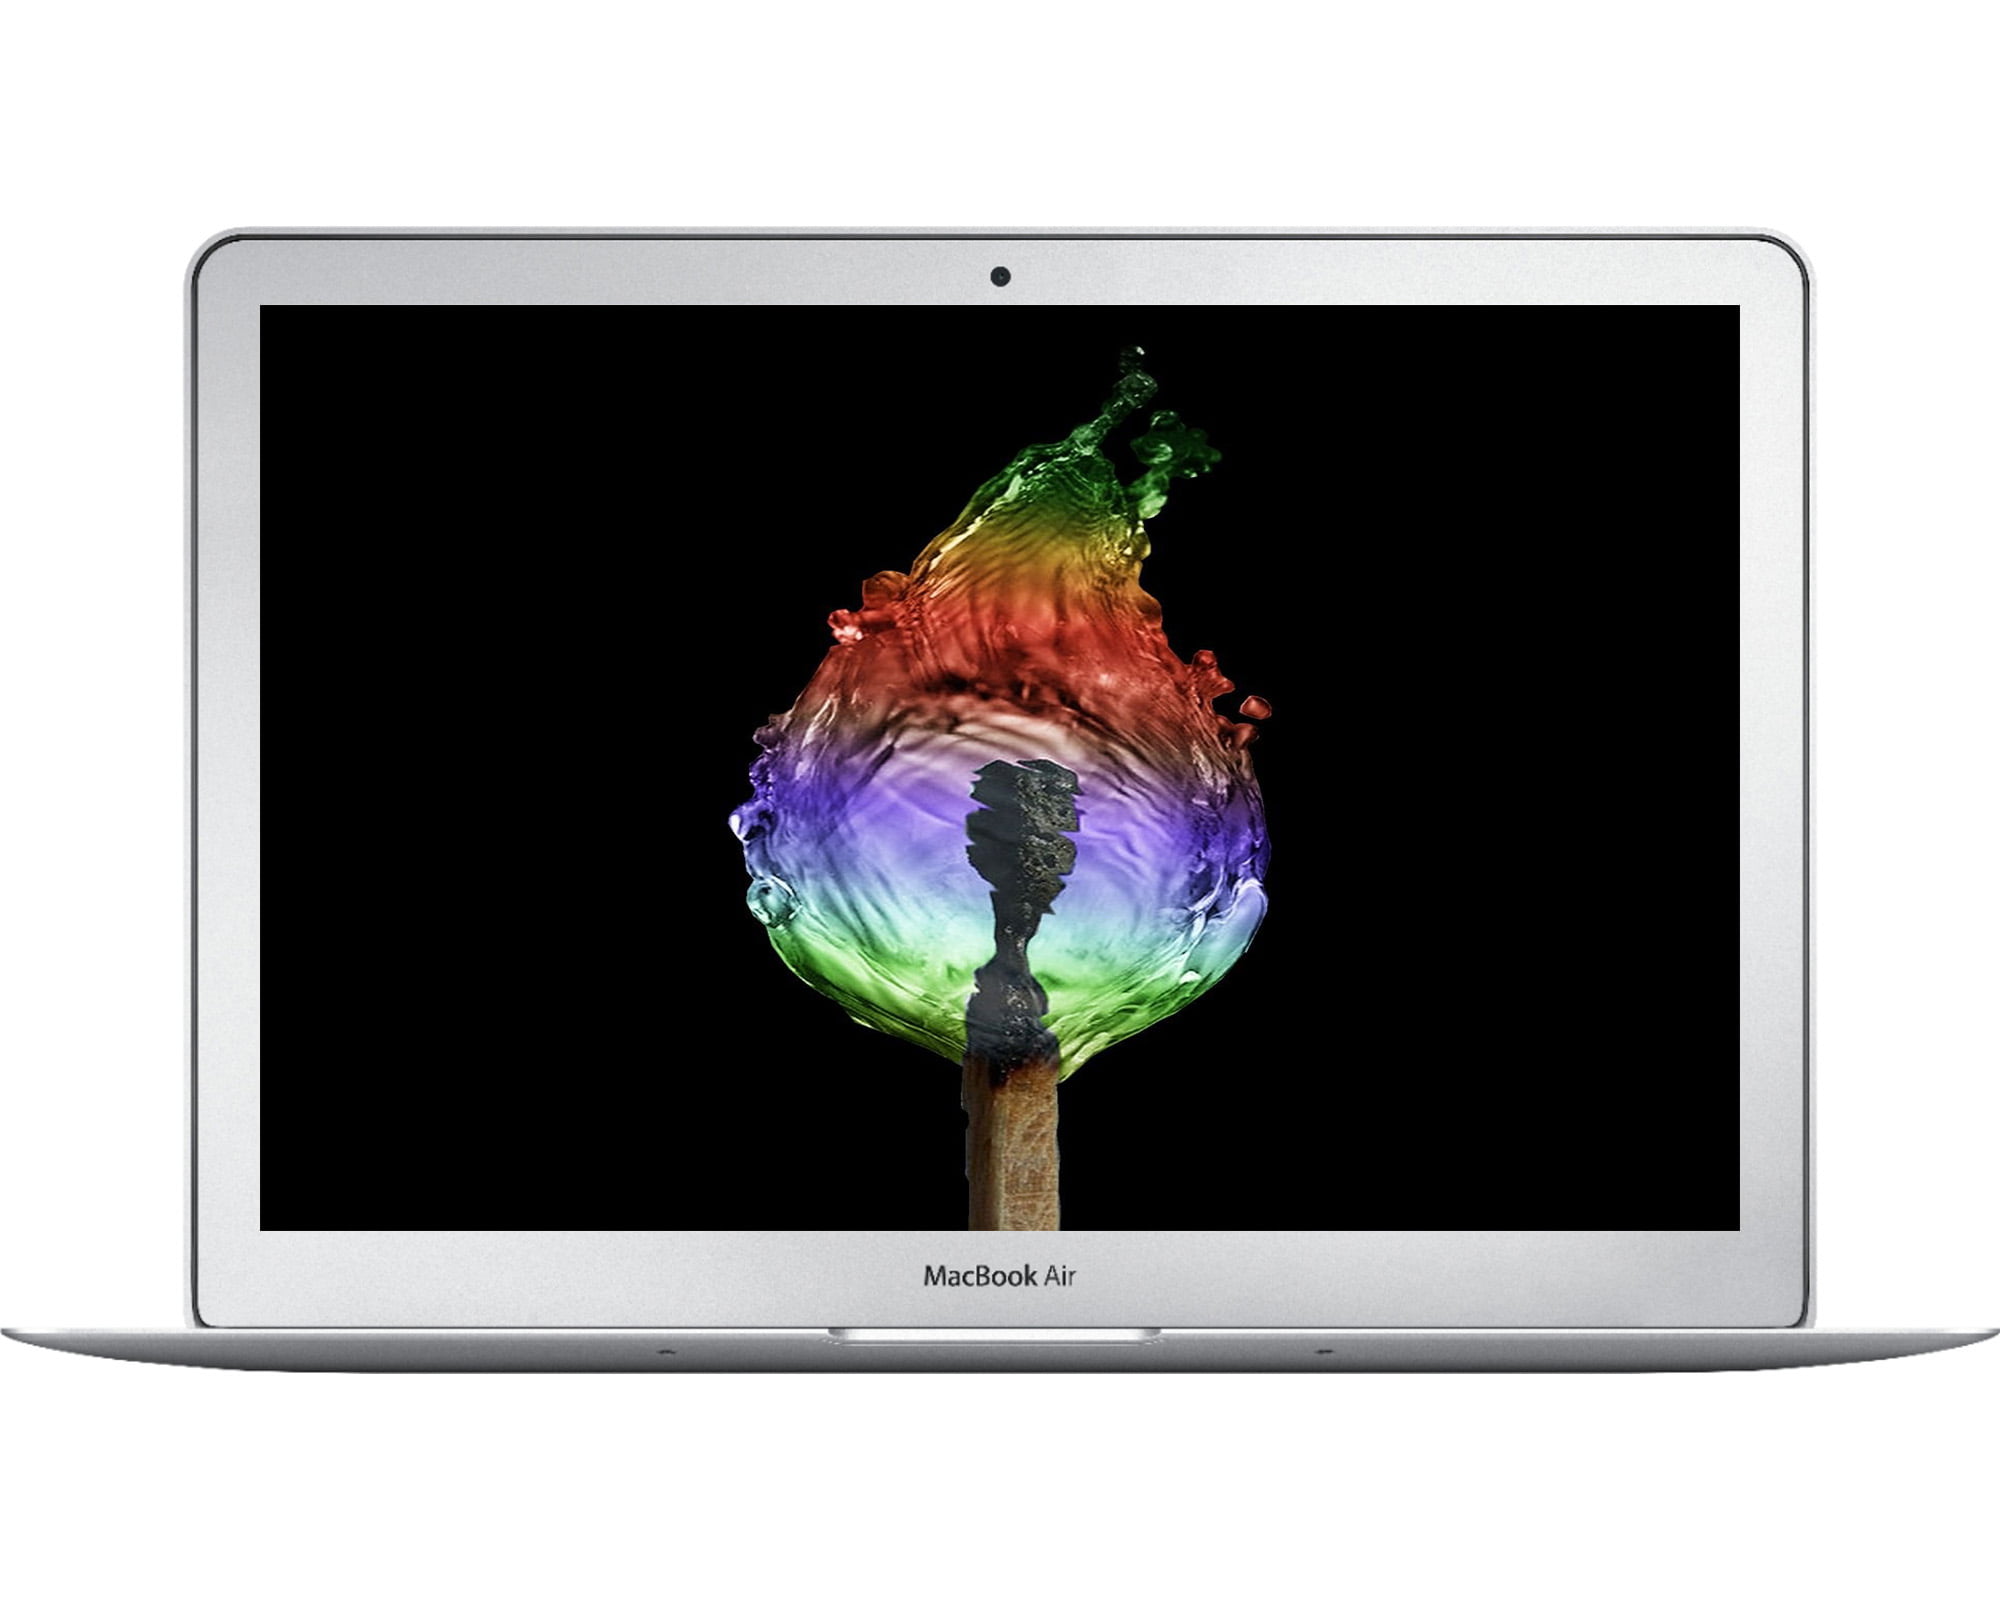 Refurbished - Apple MacBook Air Laptop, 13.3-inch, Intel Core i5, 8GB RAM,  Mac OS, 128GB SSD, and Bundle Included: Bluetooth Headset, Wireless Mouse,  